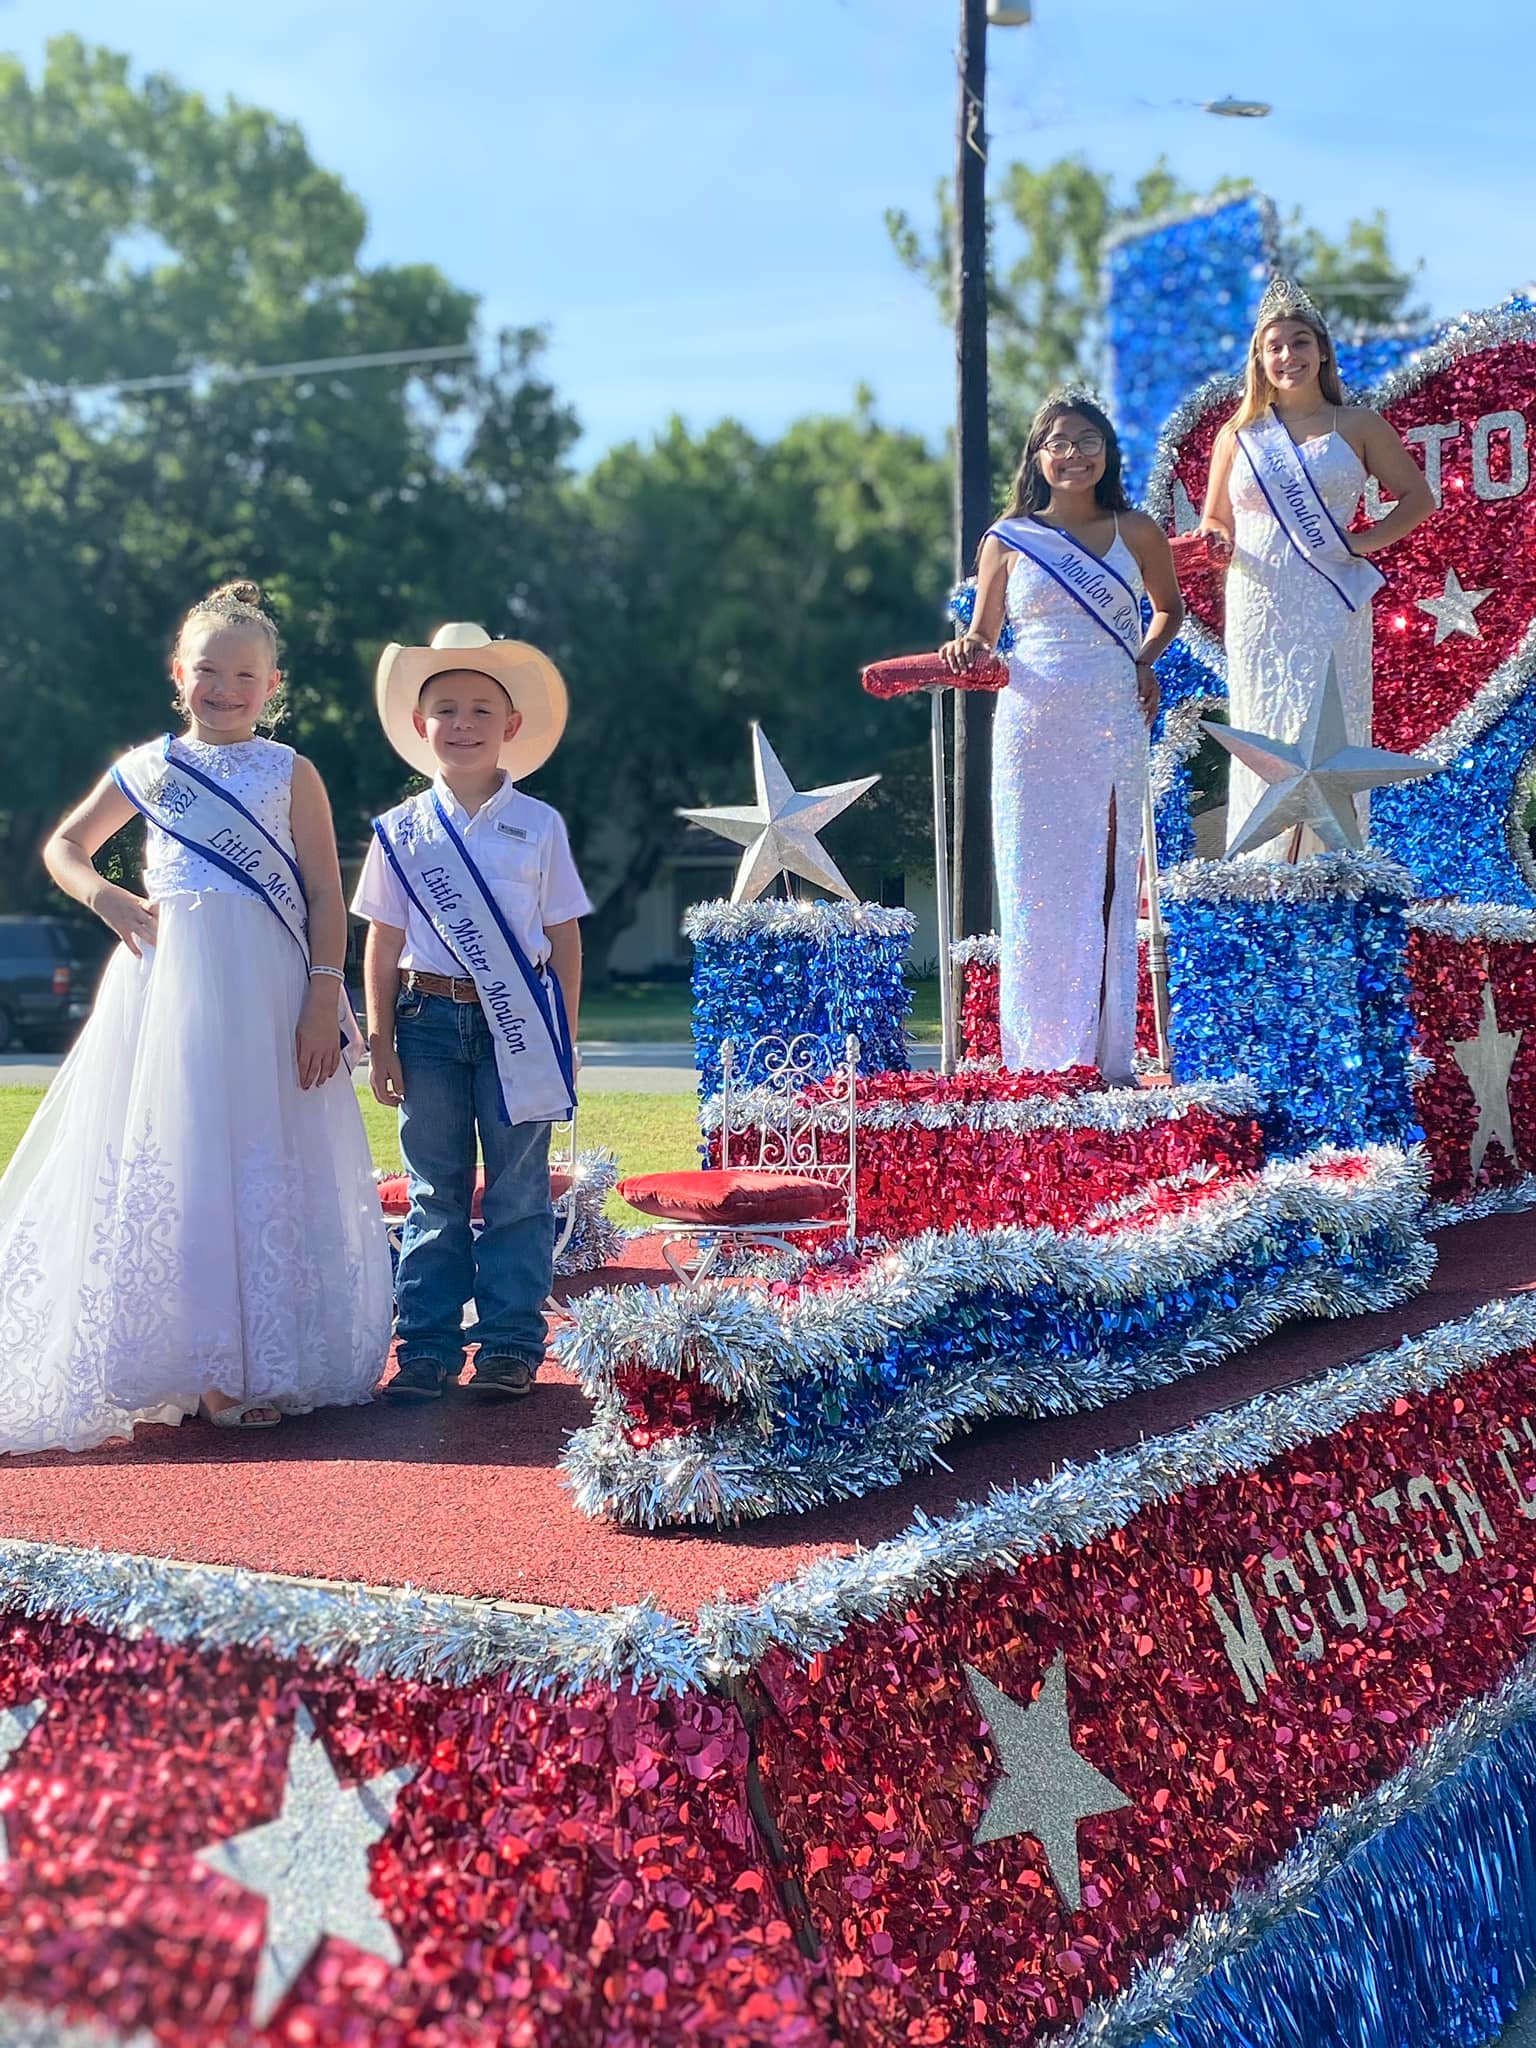 What would you look like in a crown? Lavaca County Today